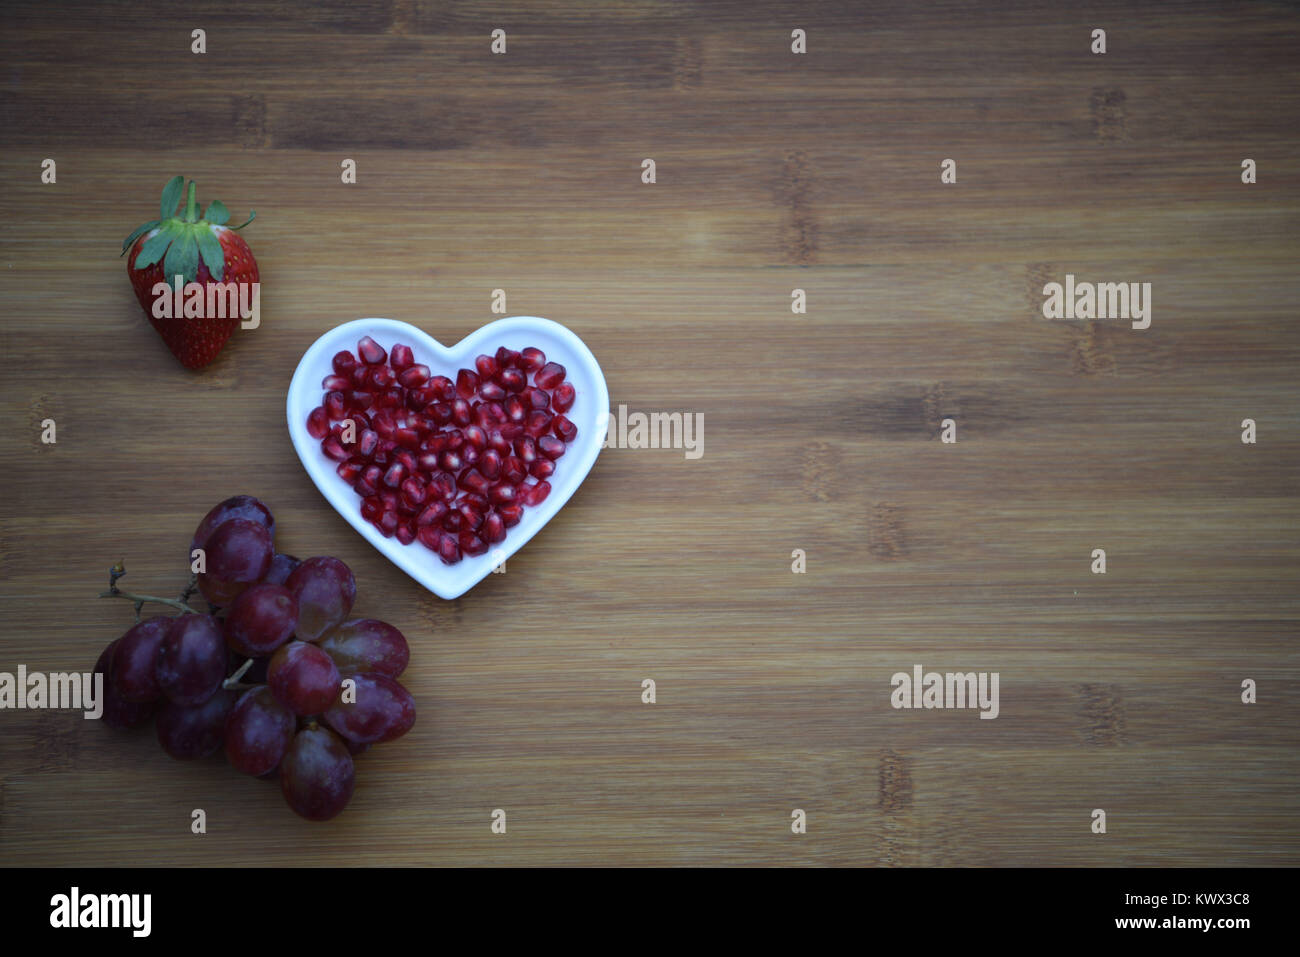 healthy food photography of red juicy shiny pomegranate seeds in love heart shape dish with a bunch of purple grapes on wood background and space Stock Photo